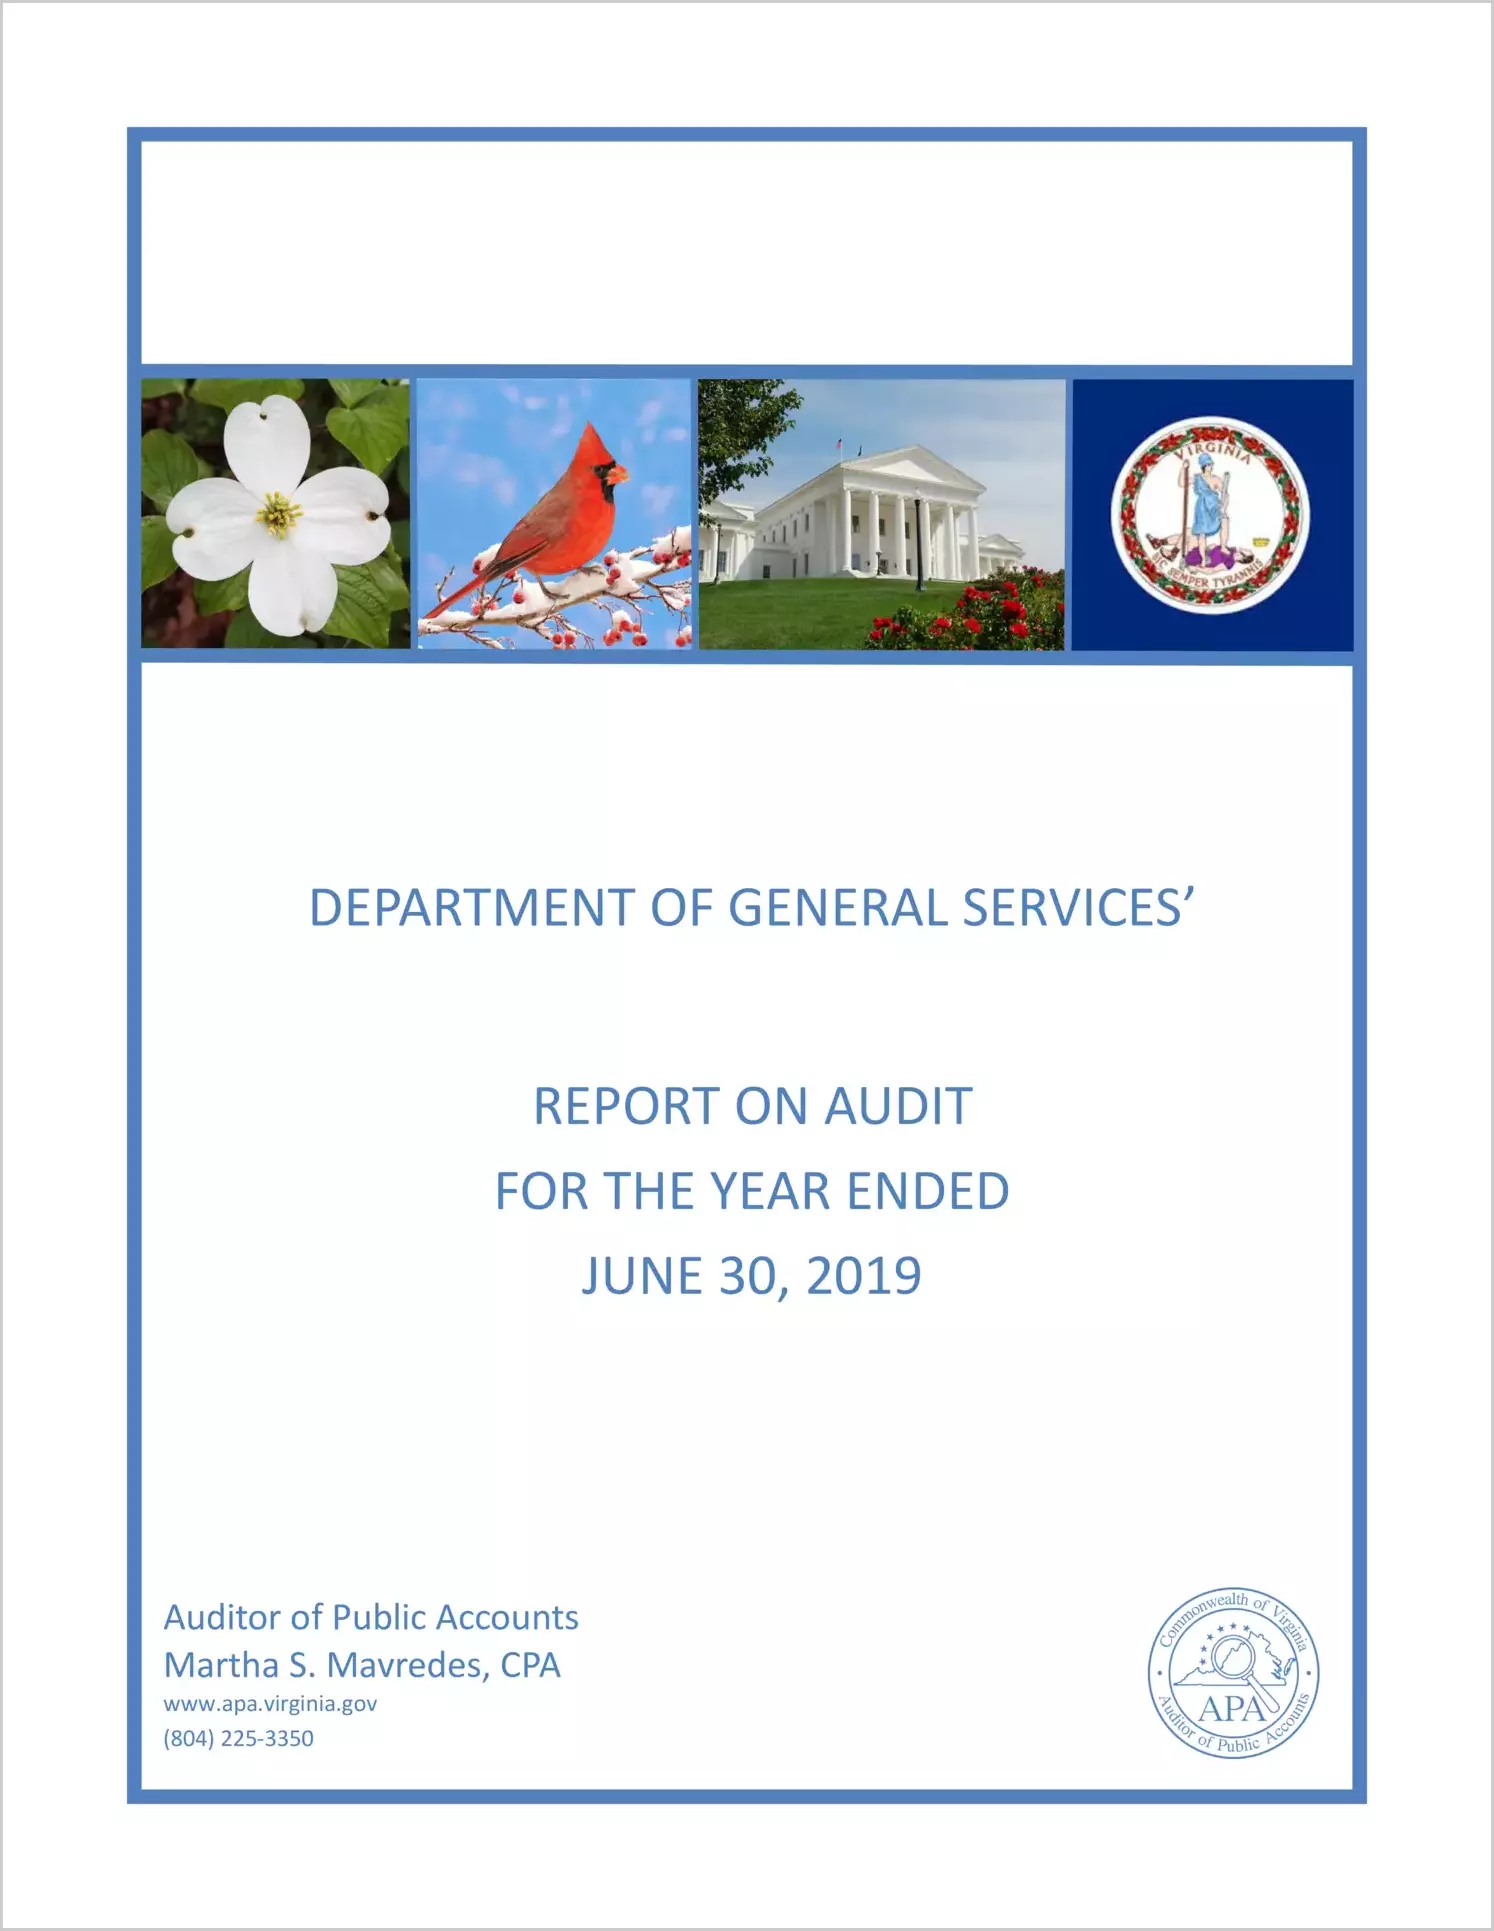 Department of General Service's for the year ended June 30, 2019